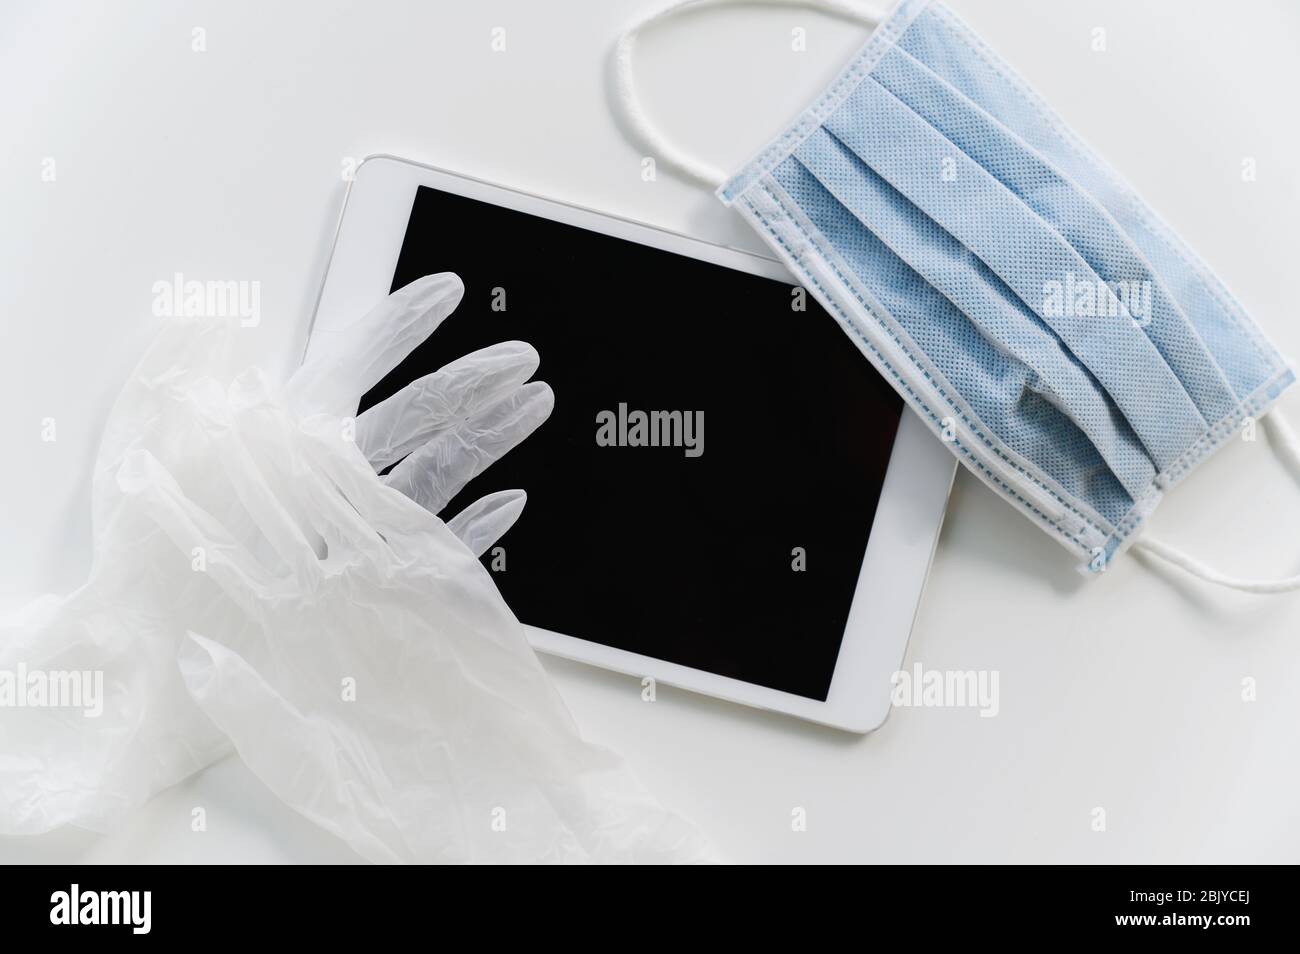 Face mask and gloves on tablet Stock Photo